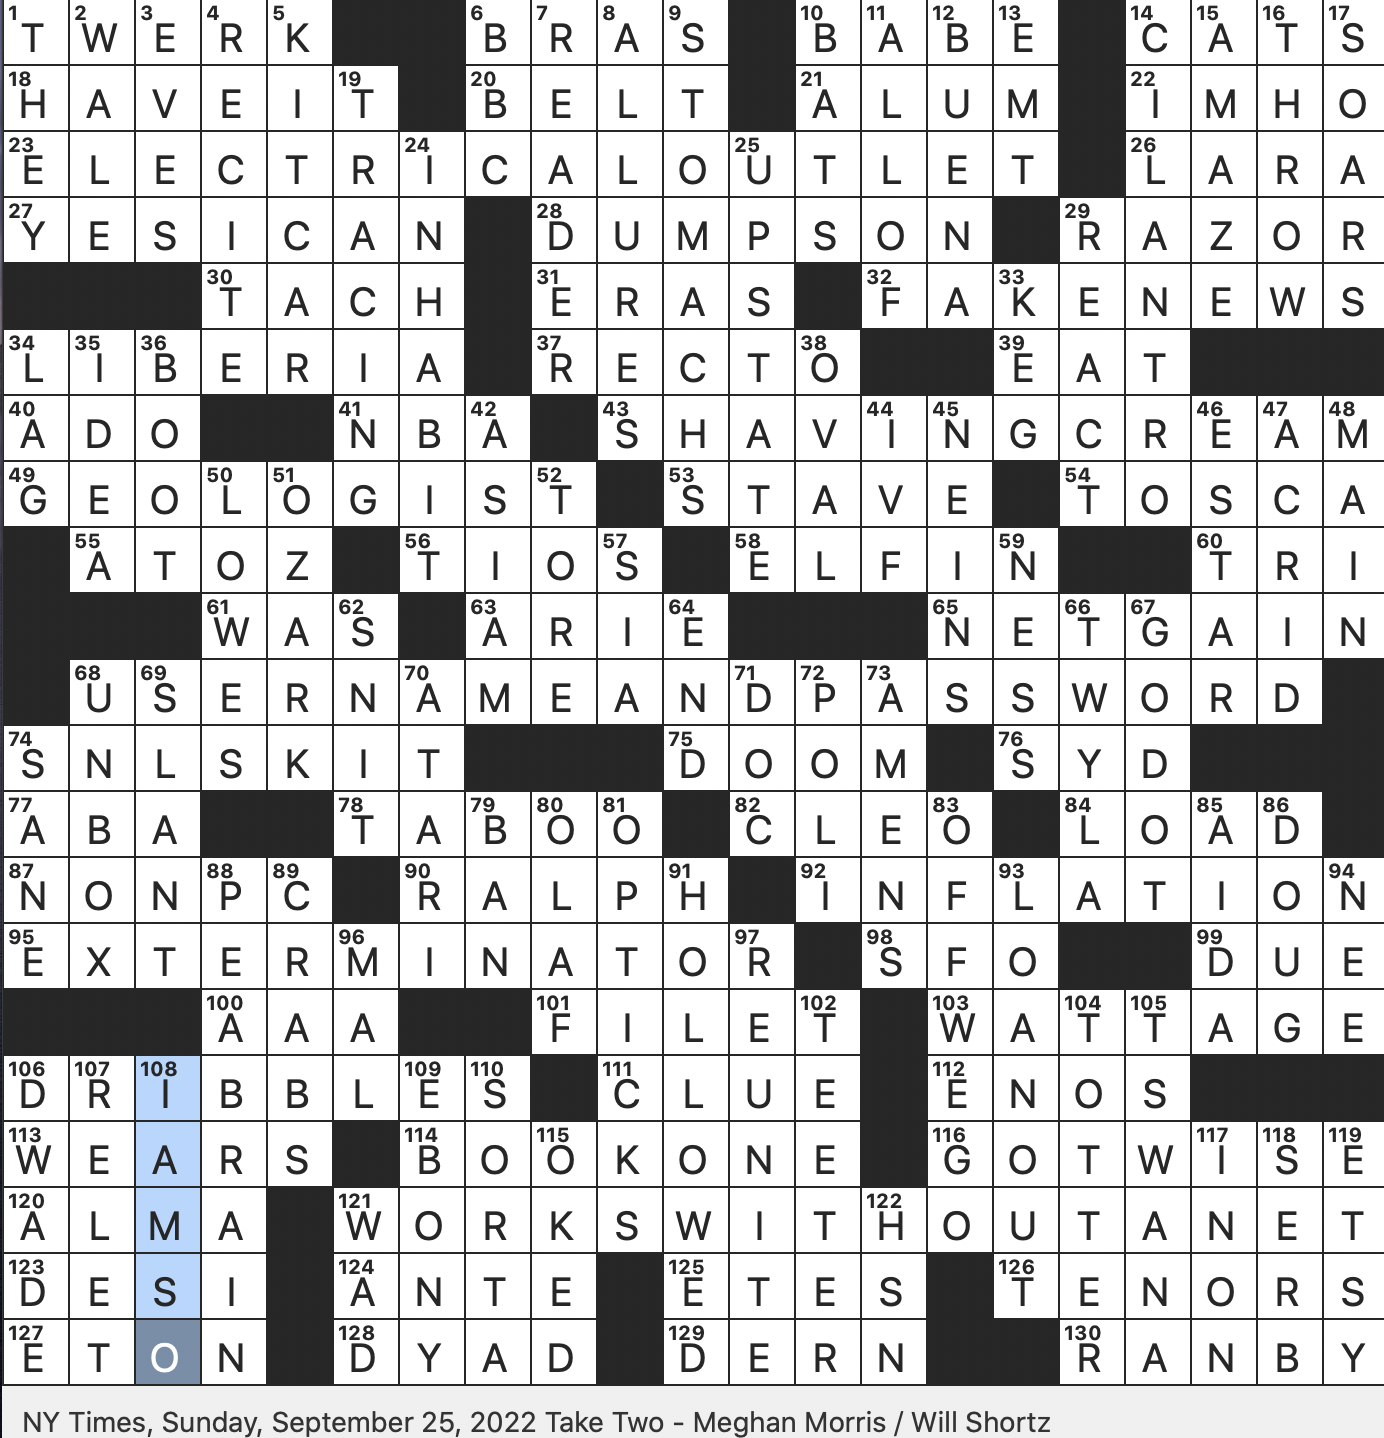 Rex Parker Does The Nyt Crossword Puzzle Modern Reproductive Tech Inits Sun 9 25 22 Sir Isaac Newton Work On The Fundamentals Of Light Odd Numbered Page Typically Opera Whose Title